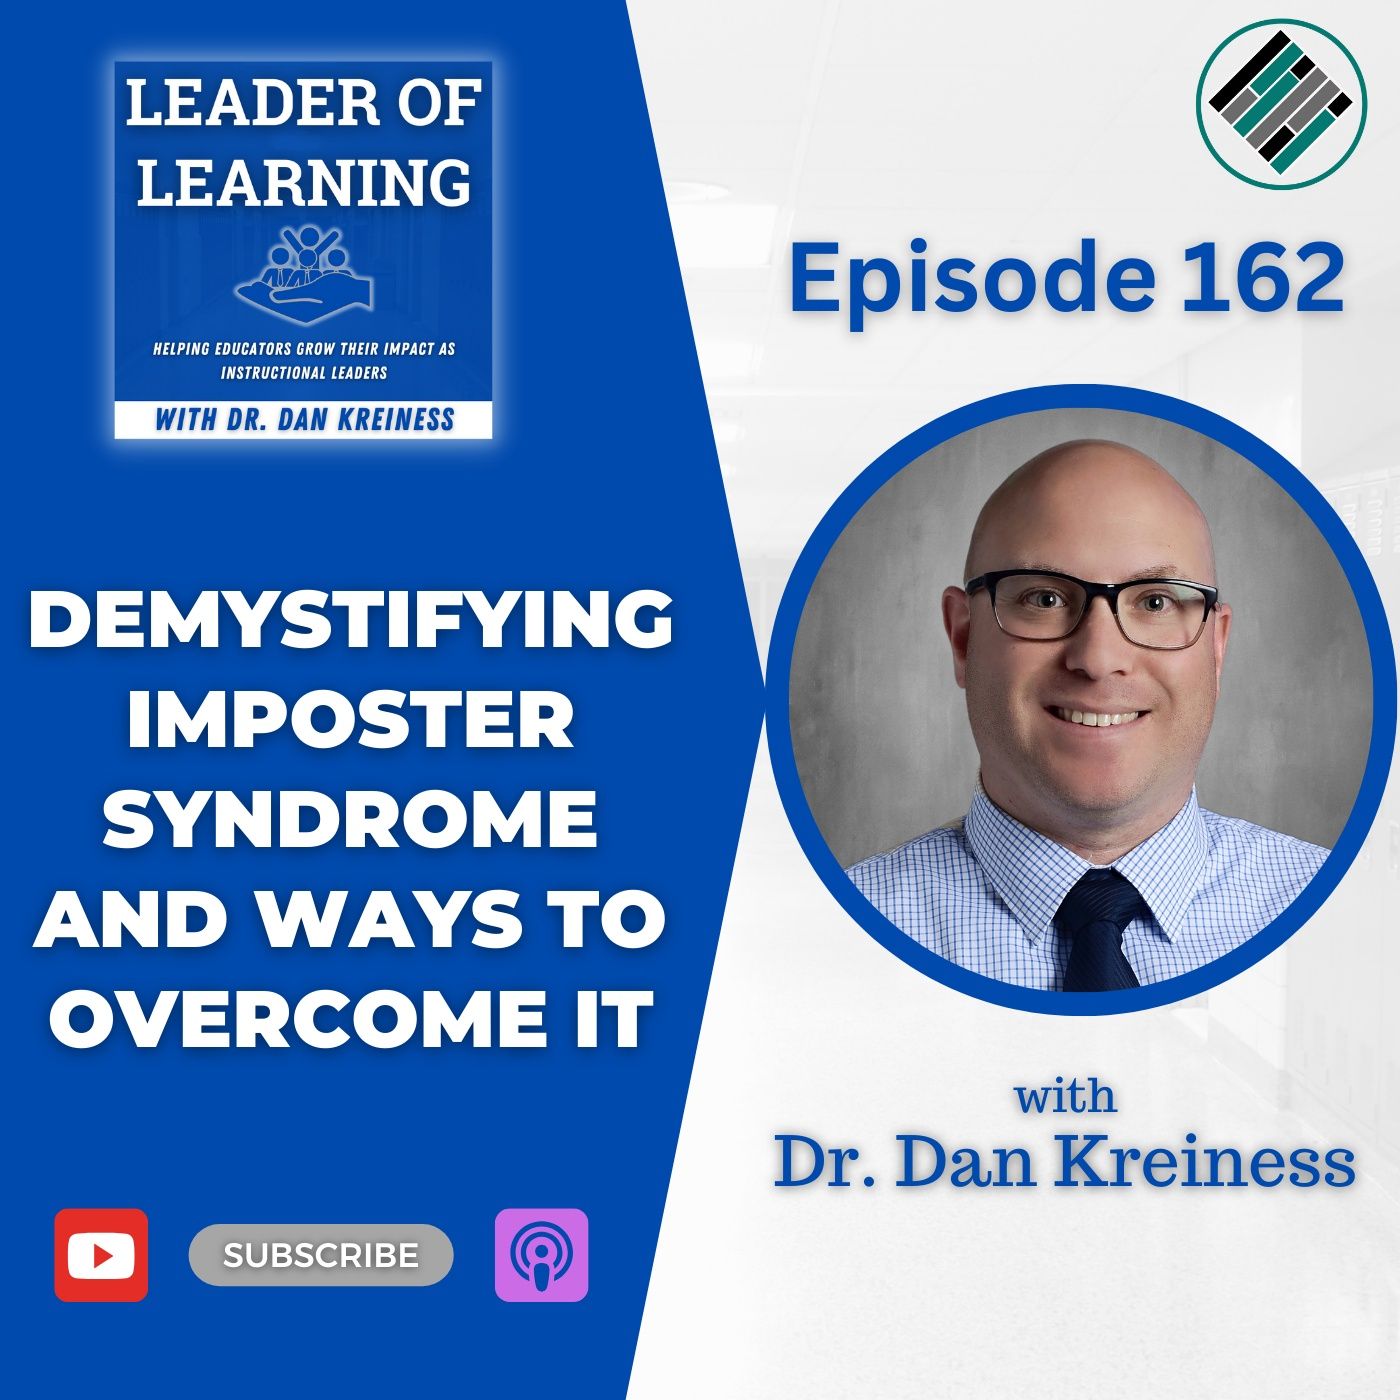 Demystifying Imposter Syndrome and Ways to Overcome it